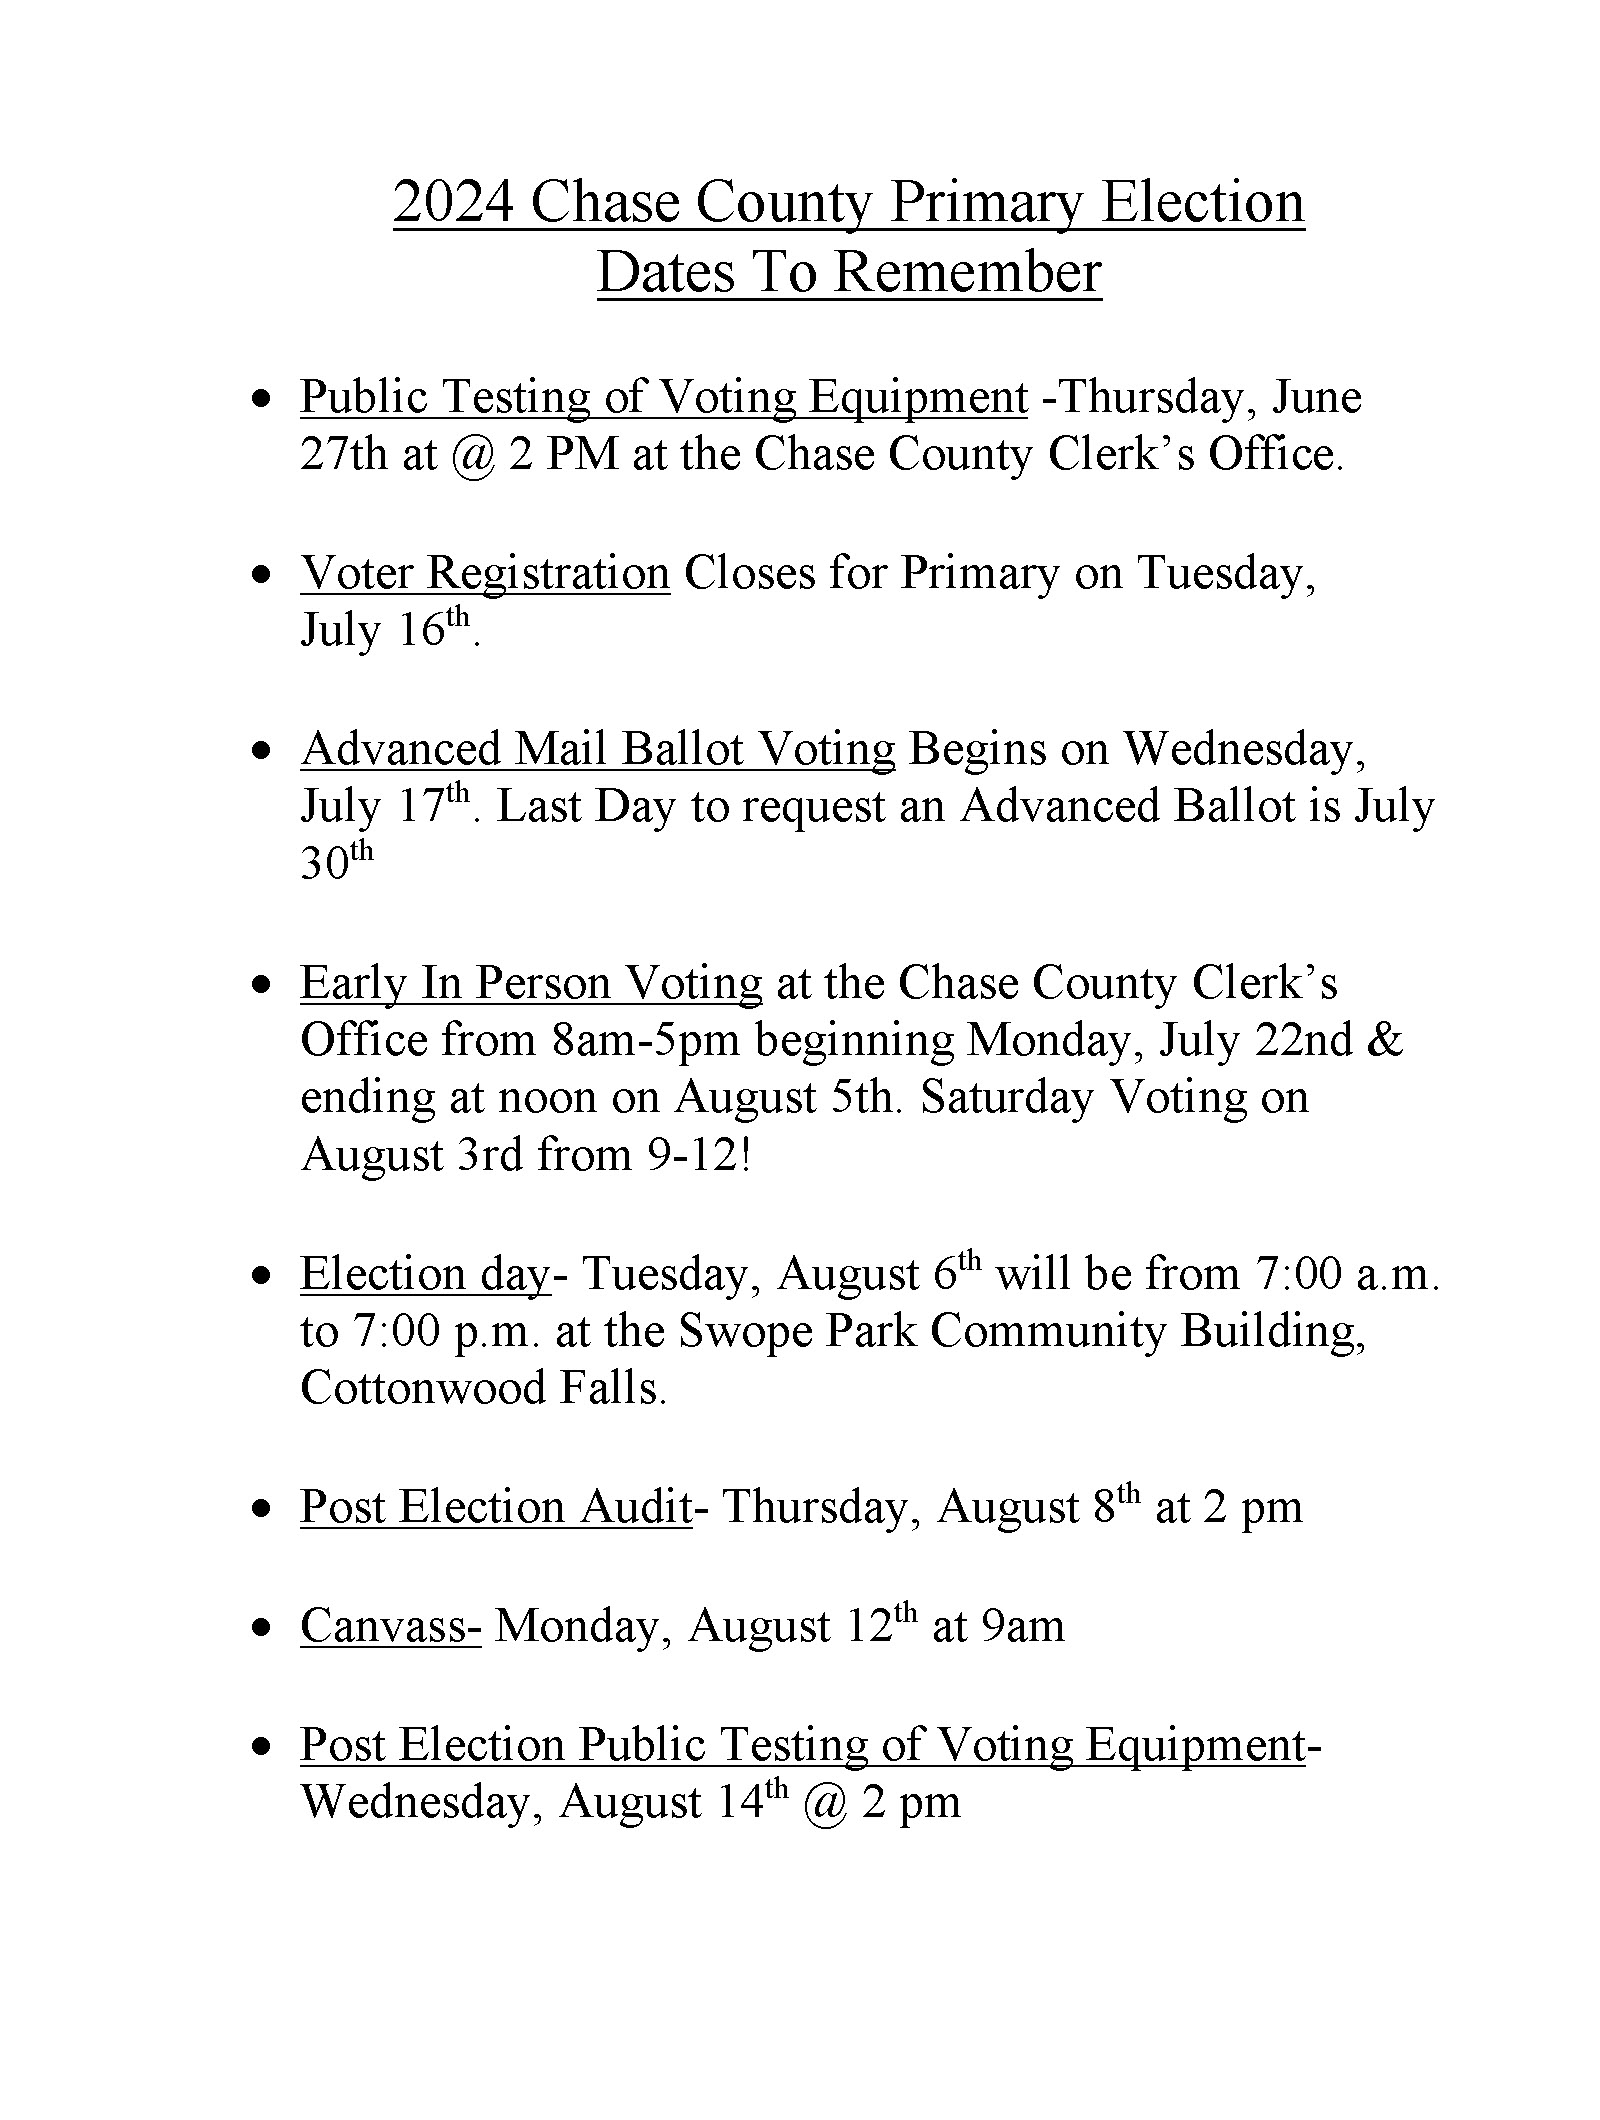 2024 Primary Election Dates to Know.jpg